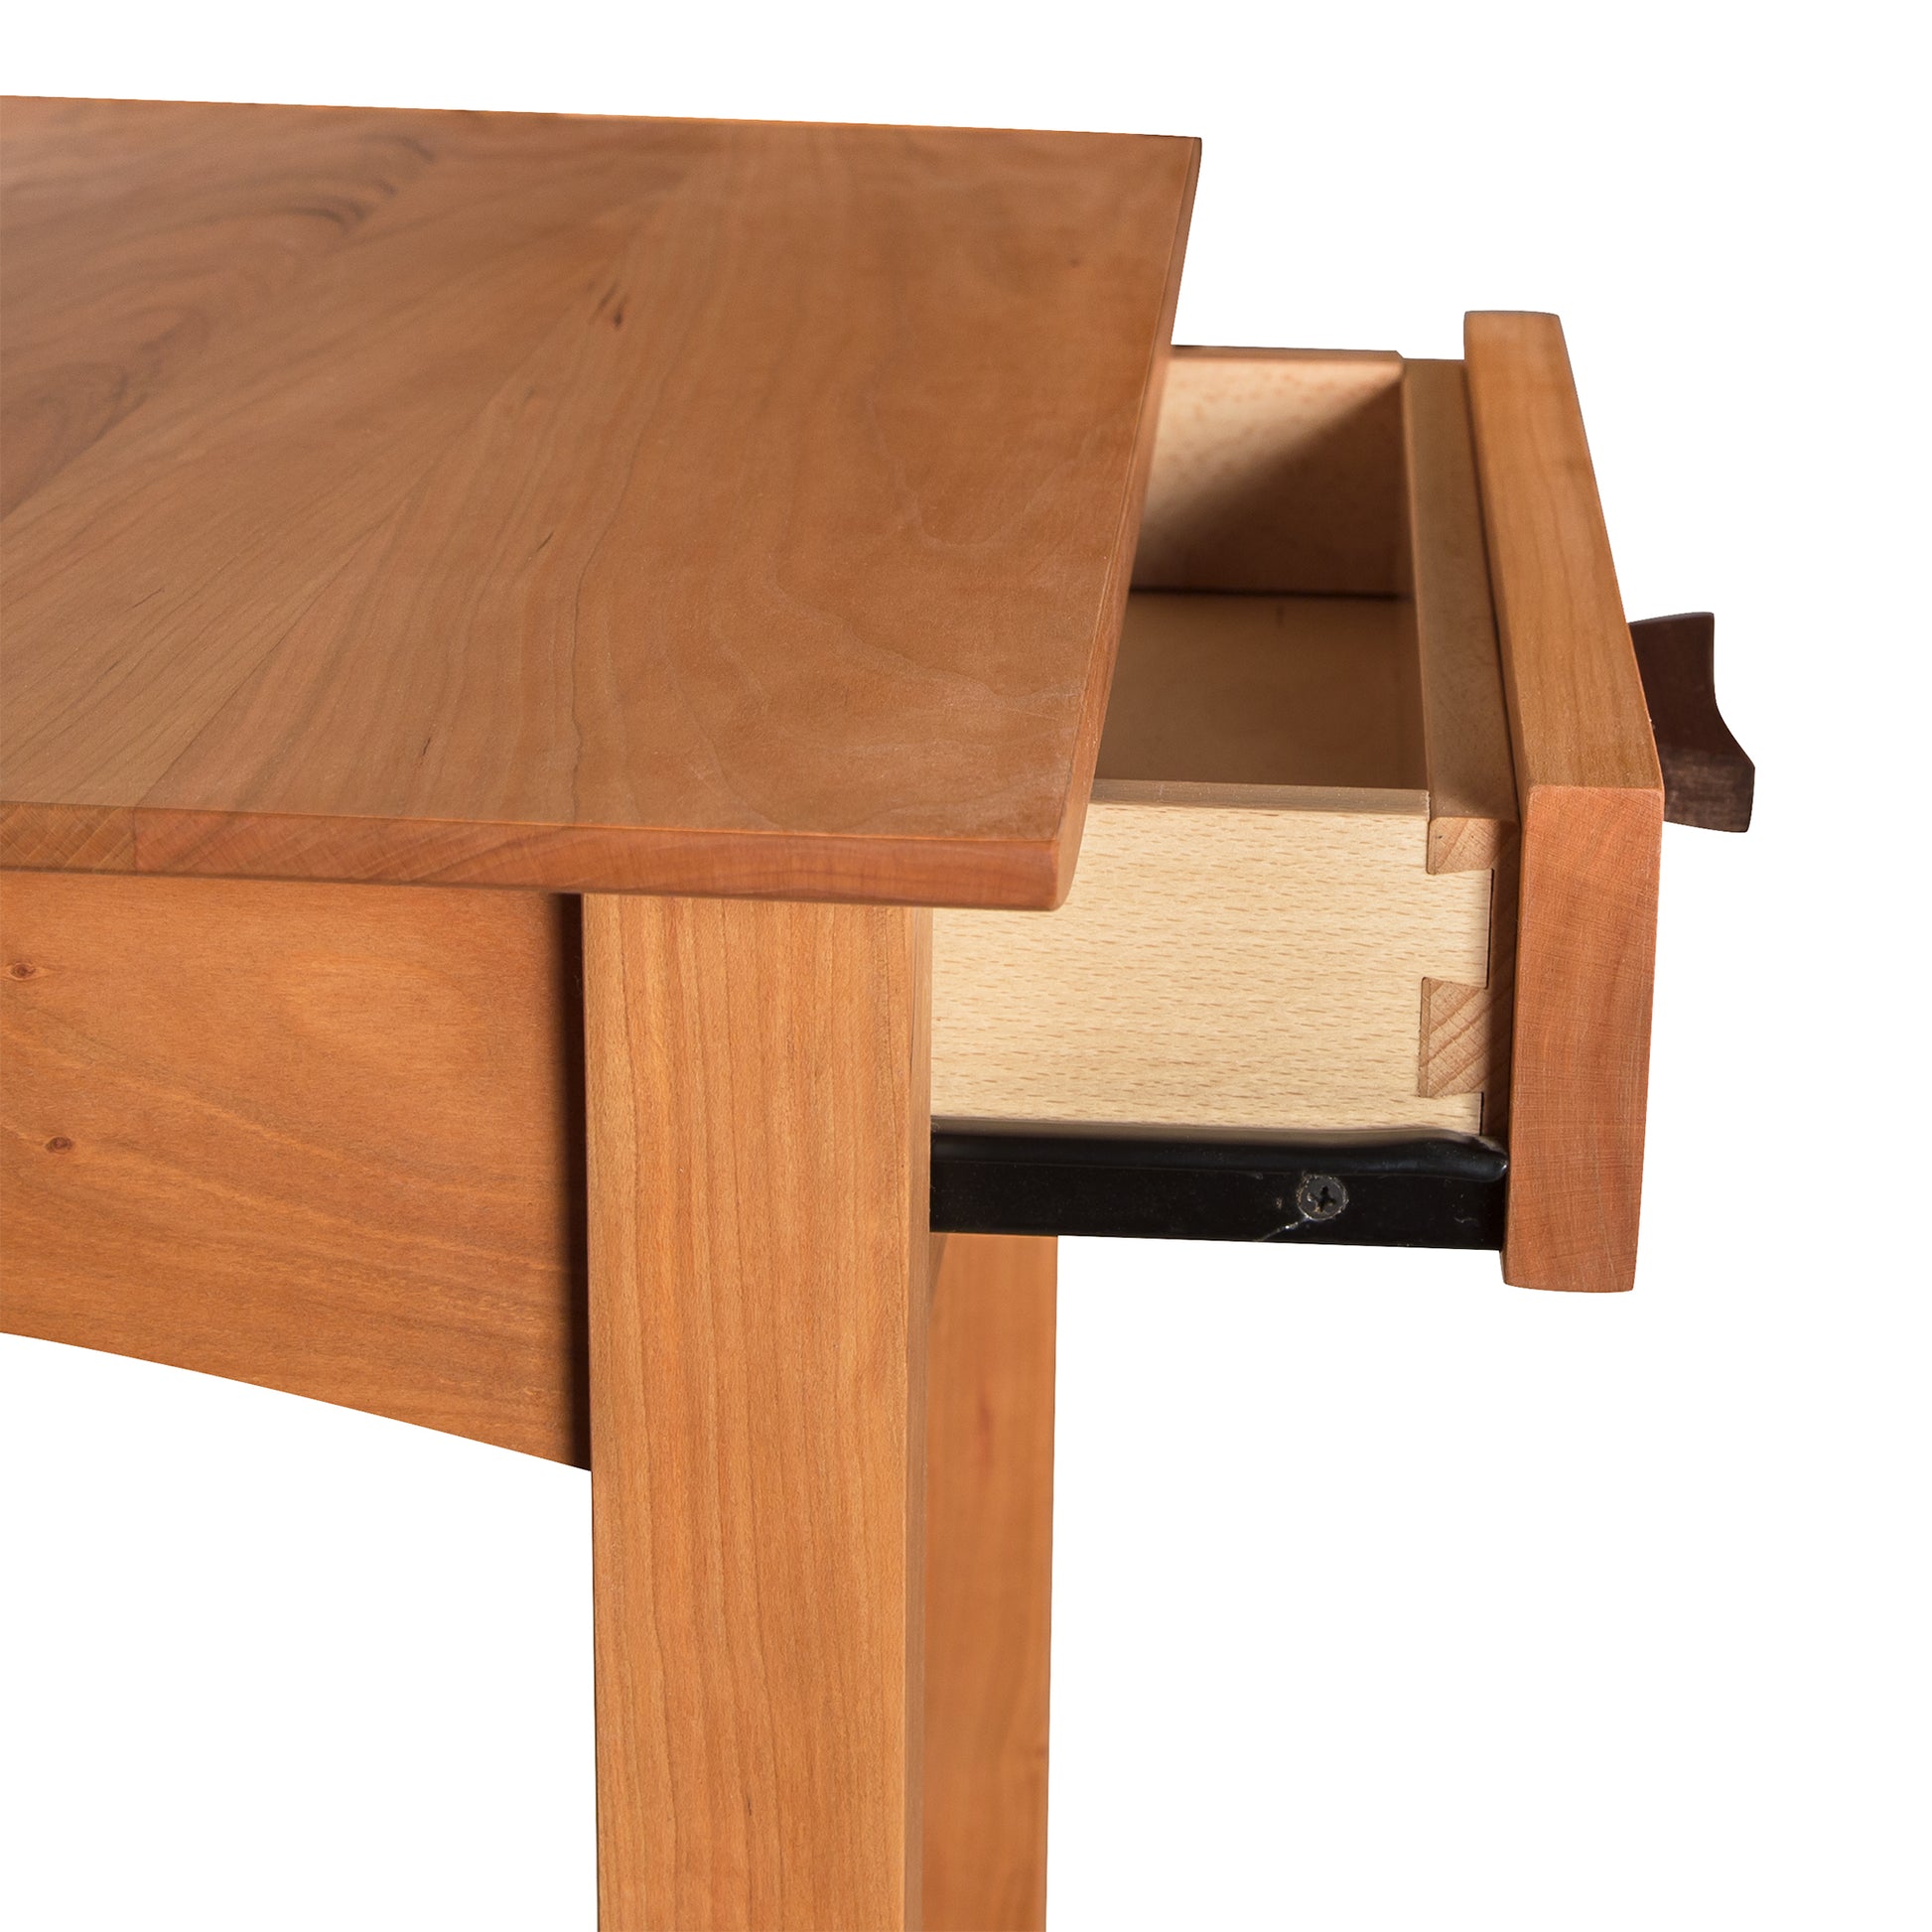 A Contemporary Craftsman 1-Drawer Open Shelf Nightstand with arts and crafts styling, featuring a wooden desk with a drawer under it, made by Vermont Furniture Designs.